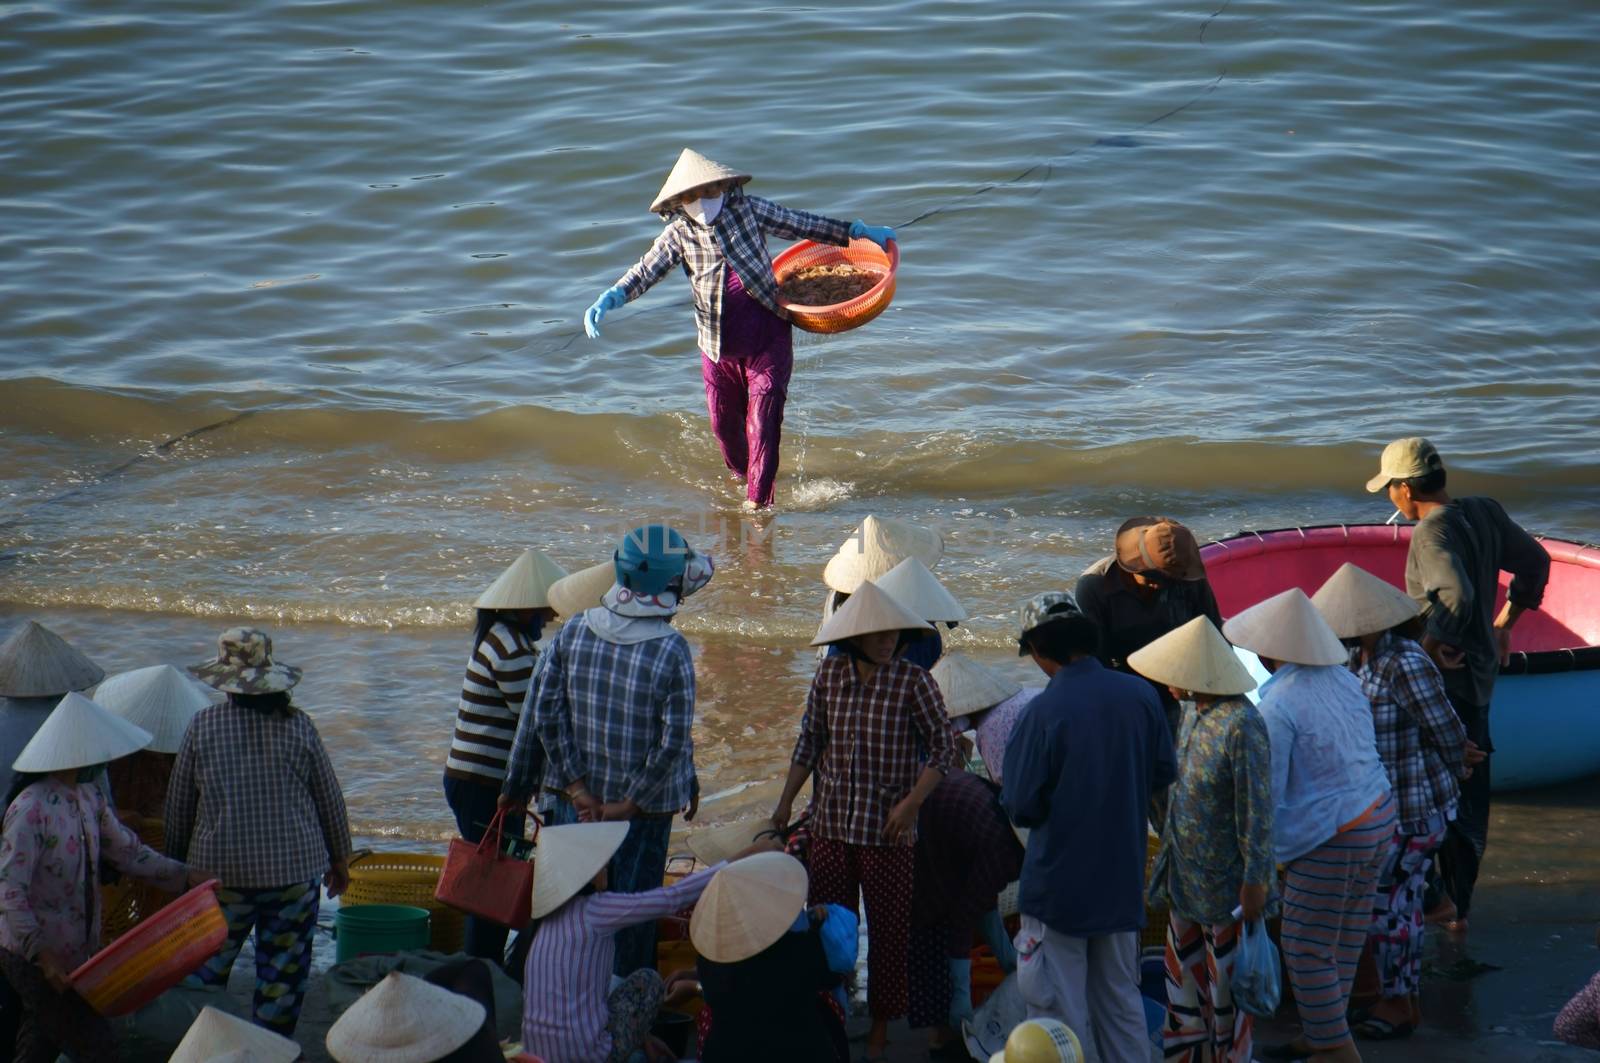 Crowd of people make deal fish at seashore  by xuanhuongho